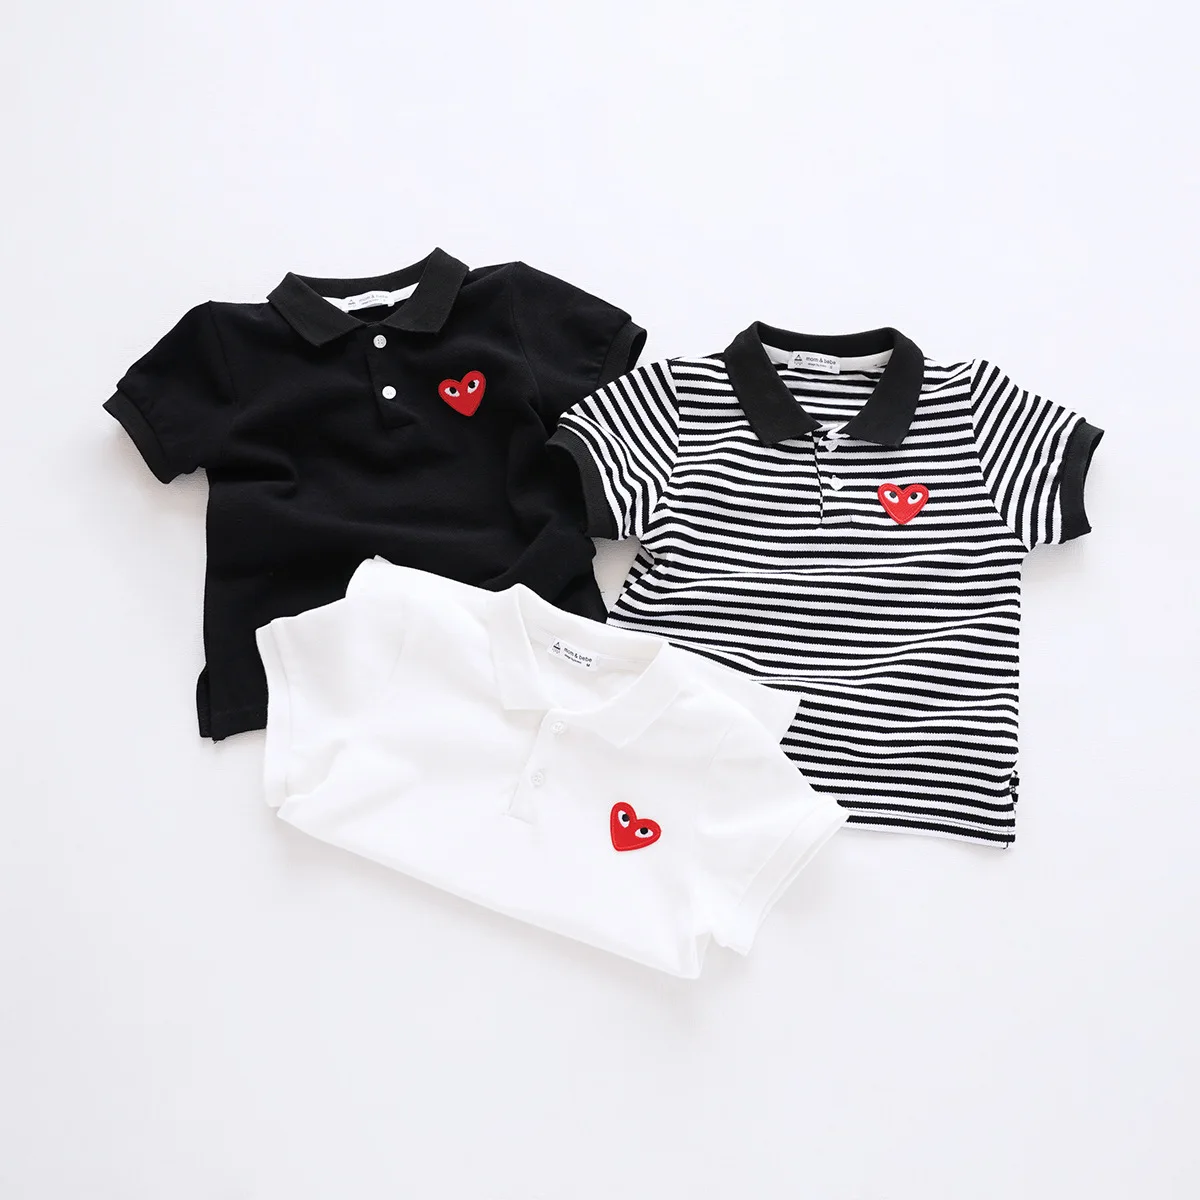 Christmas Polo Shirt Baby Boy T-Shirt Short Sleeve Kids Tops Casual Blouse for Age 1-6 Years Old